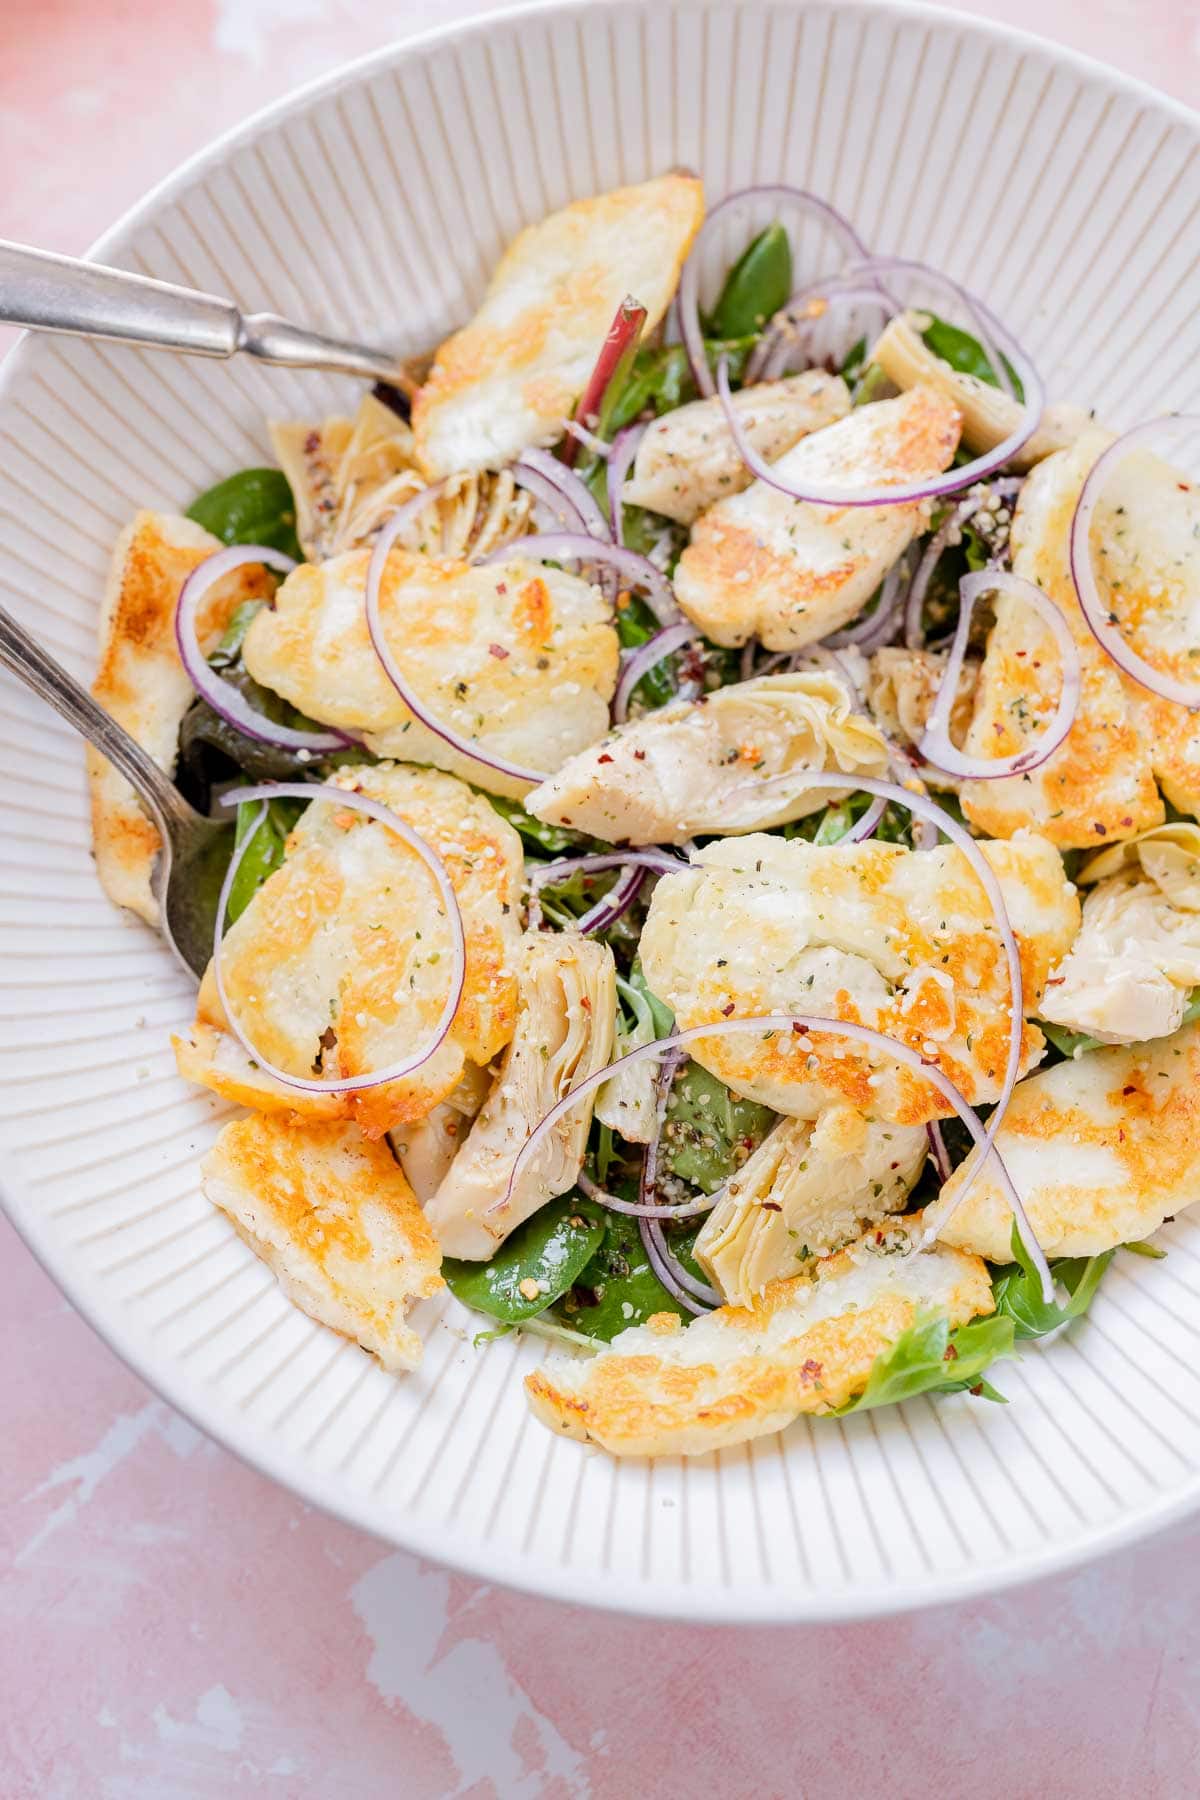 A large white bowl of halloumi, artichoke hearts, salad greens, seeds and red onion slices.